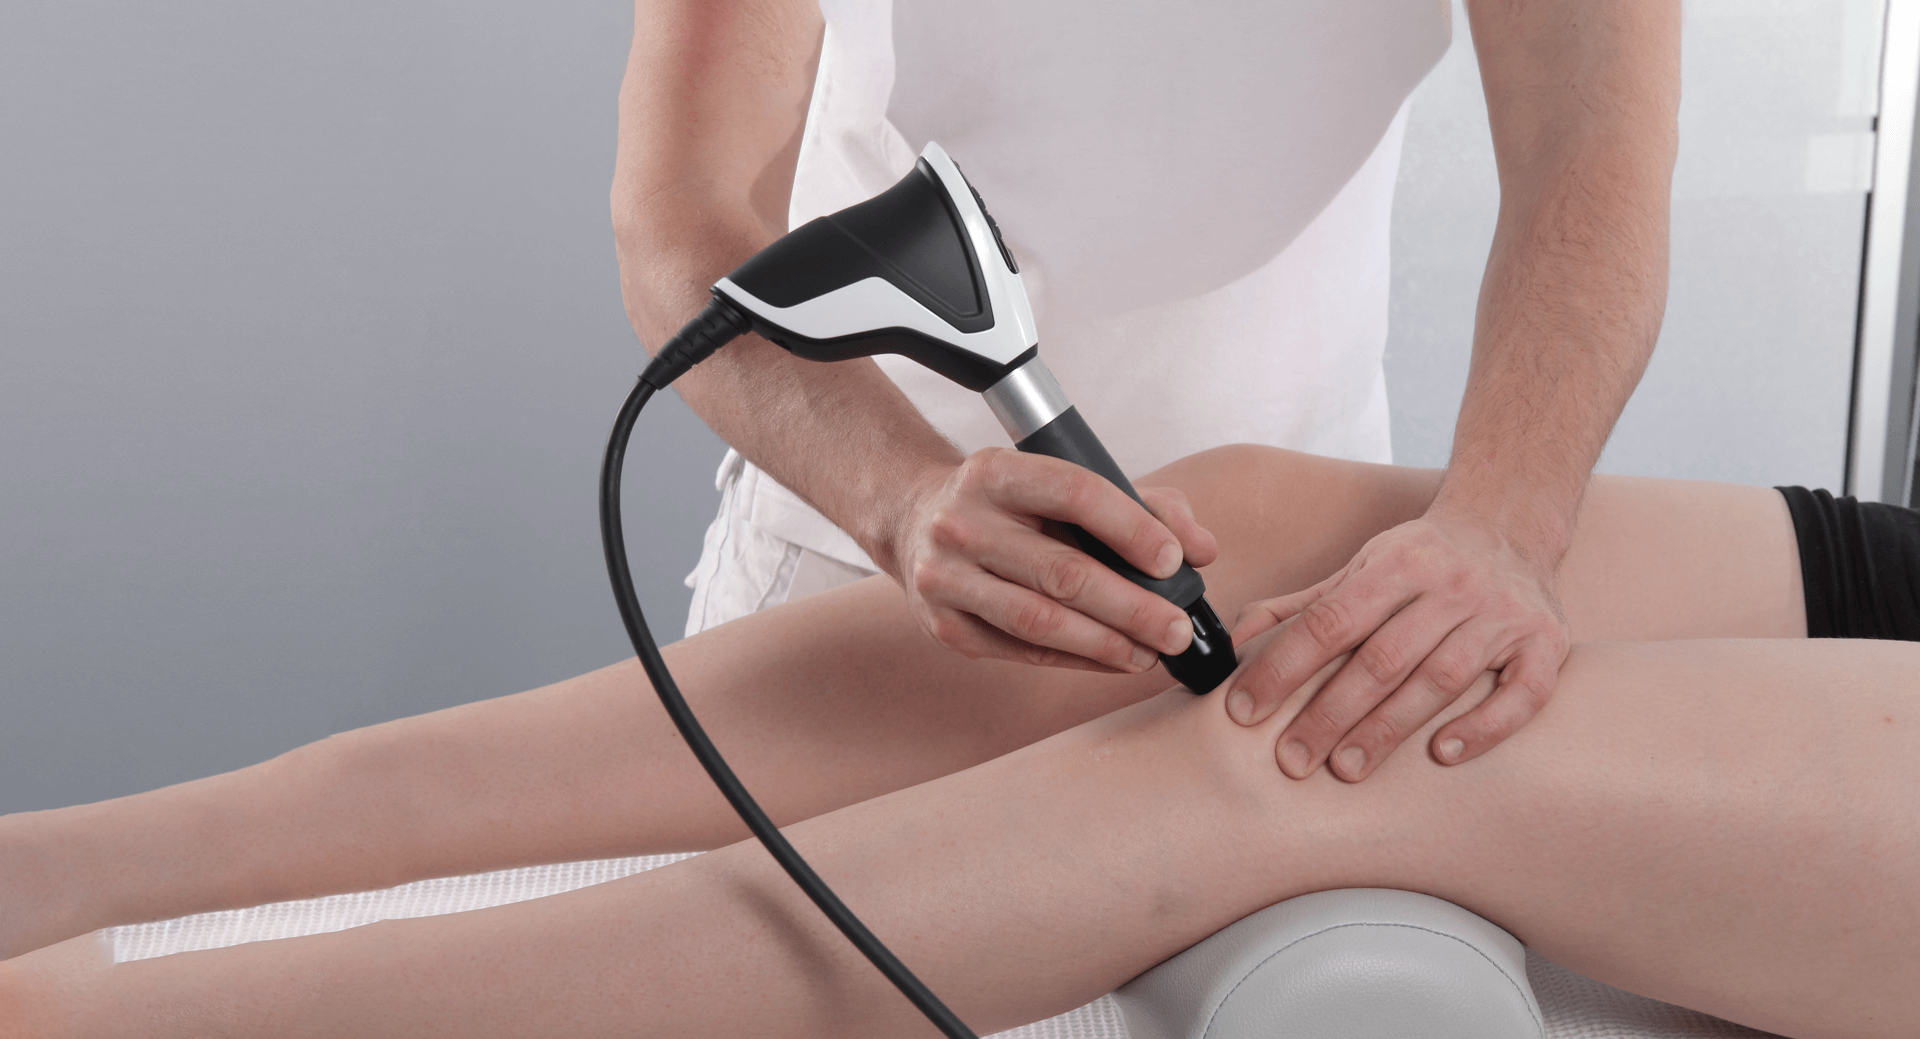 An exception to a treatment with the Sepia handpiece by Storz Medical